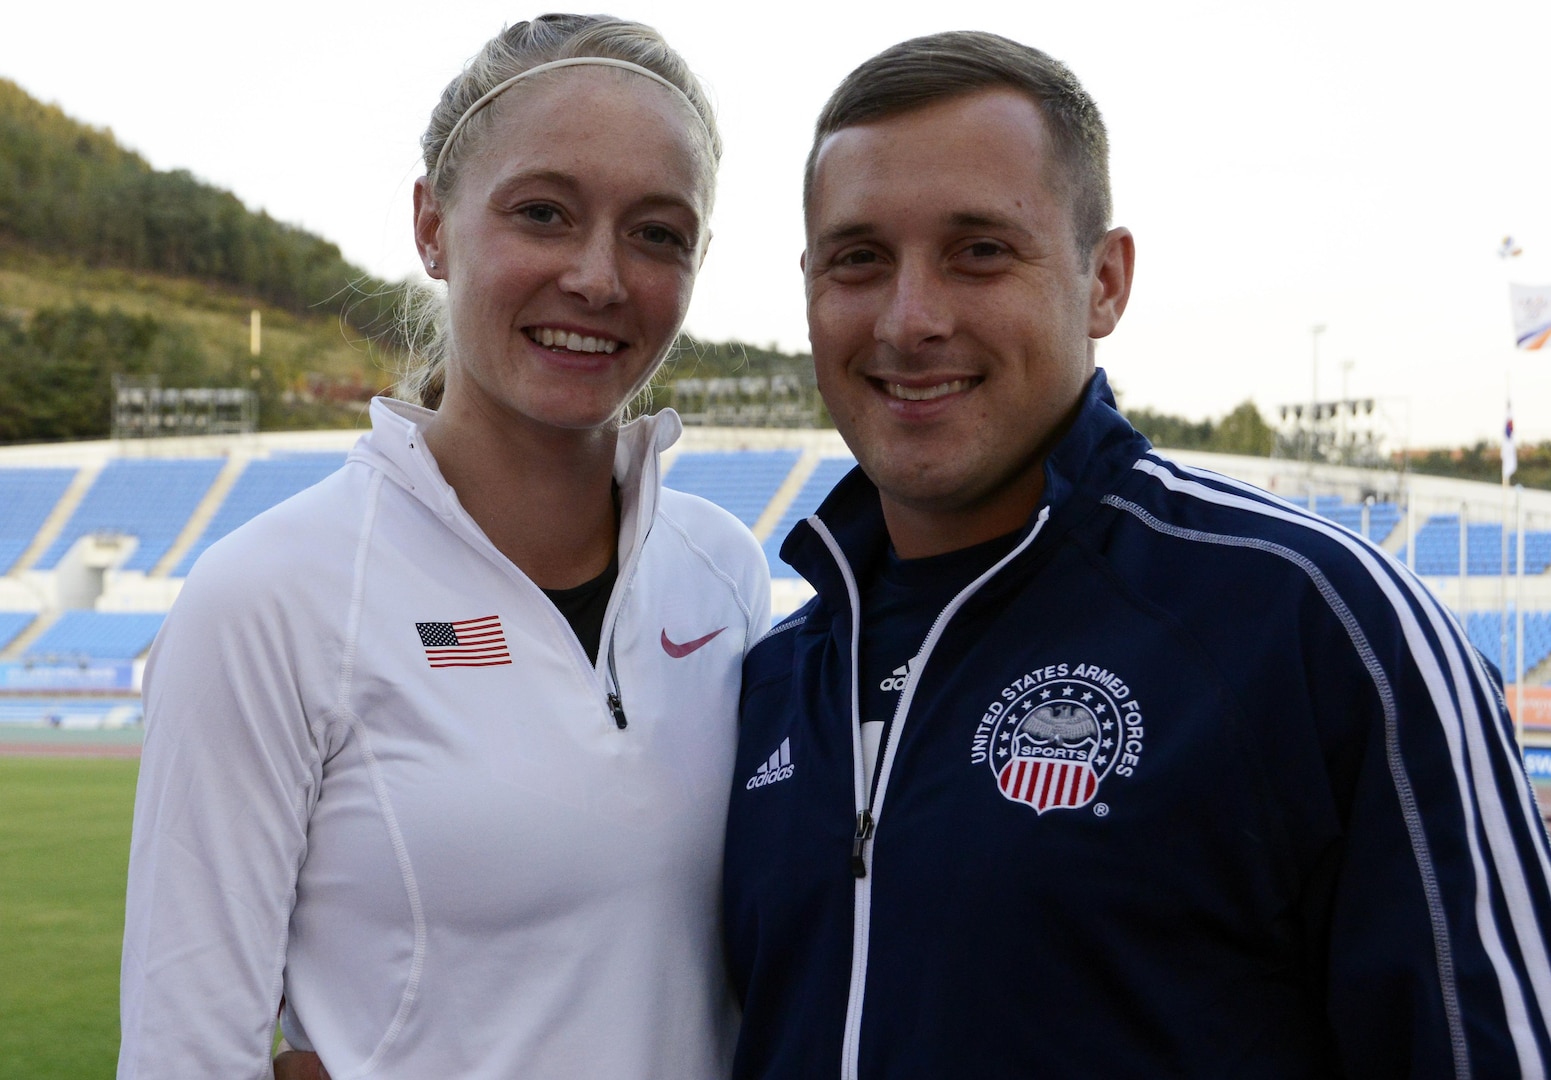 1st Lt. John Melcher of Fort Meade, Md., and his wife 2nd Lt. Annette Eichenberger Melcher of the Air Force Academy in Colorado Springs, embrace at the Military World Games in MunGyeong, South Korea, last week after she ran the 800-meter final.  She finished 8th with a time of 2:07.61 on Oct. 5, 2015.